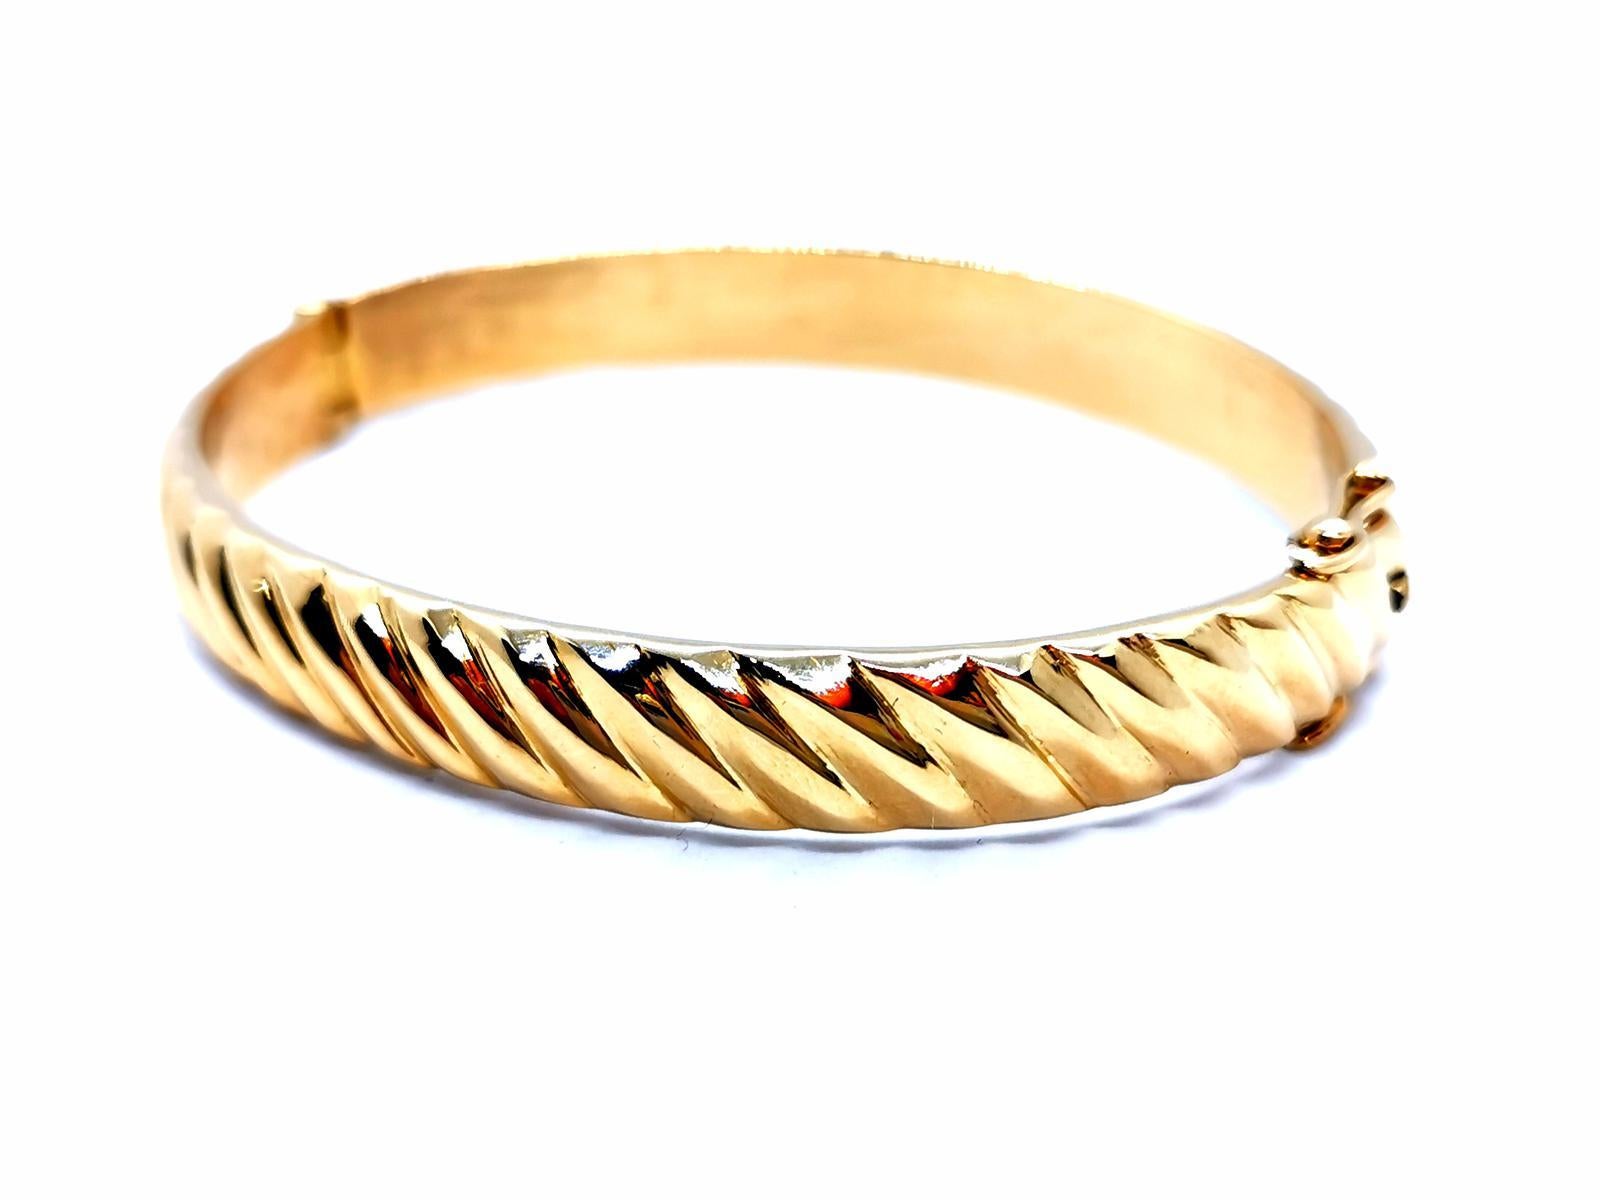 Bangle. gold yellow 750 mils (18 carats). ring opening. oval shape. size: 18 cm. inside diameter: 5.9 cm x 4.8 cm. width: 0.85 cm. thickness: 0.28 cm clasp with two eight safety. total weight: 51.81 g. punch eagle's head. excellent condition
